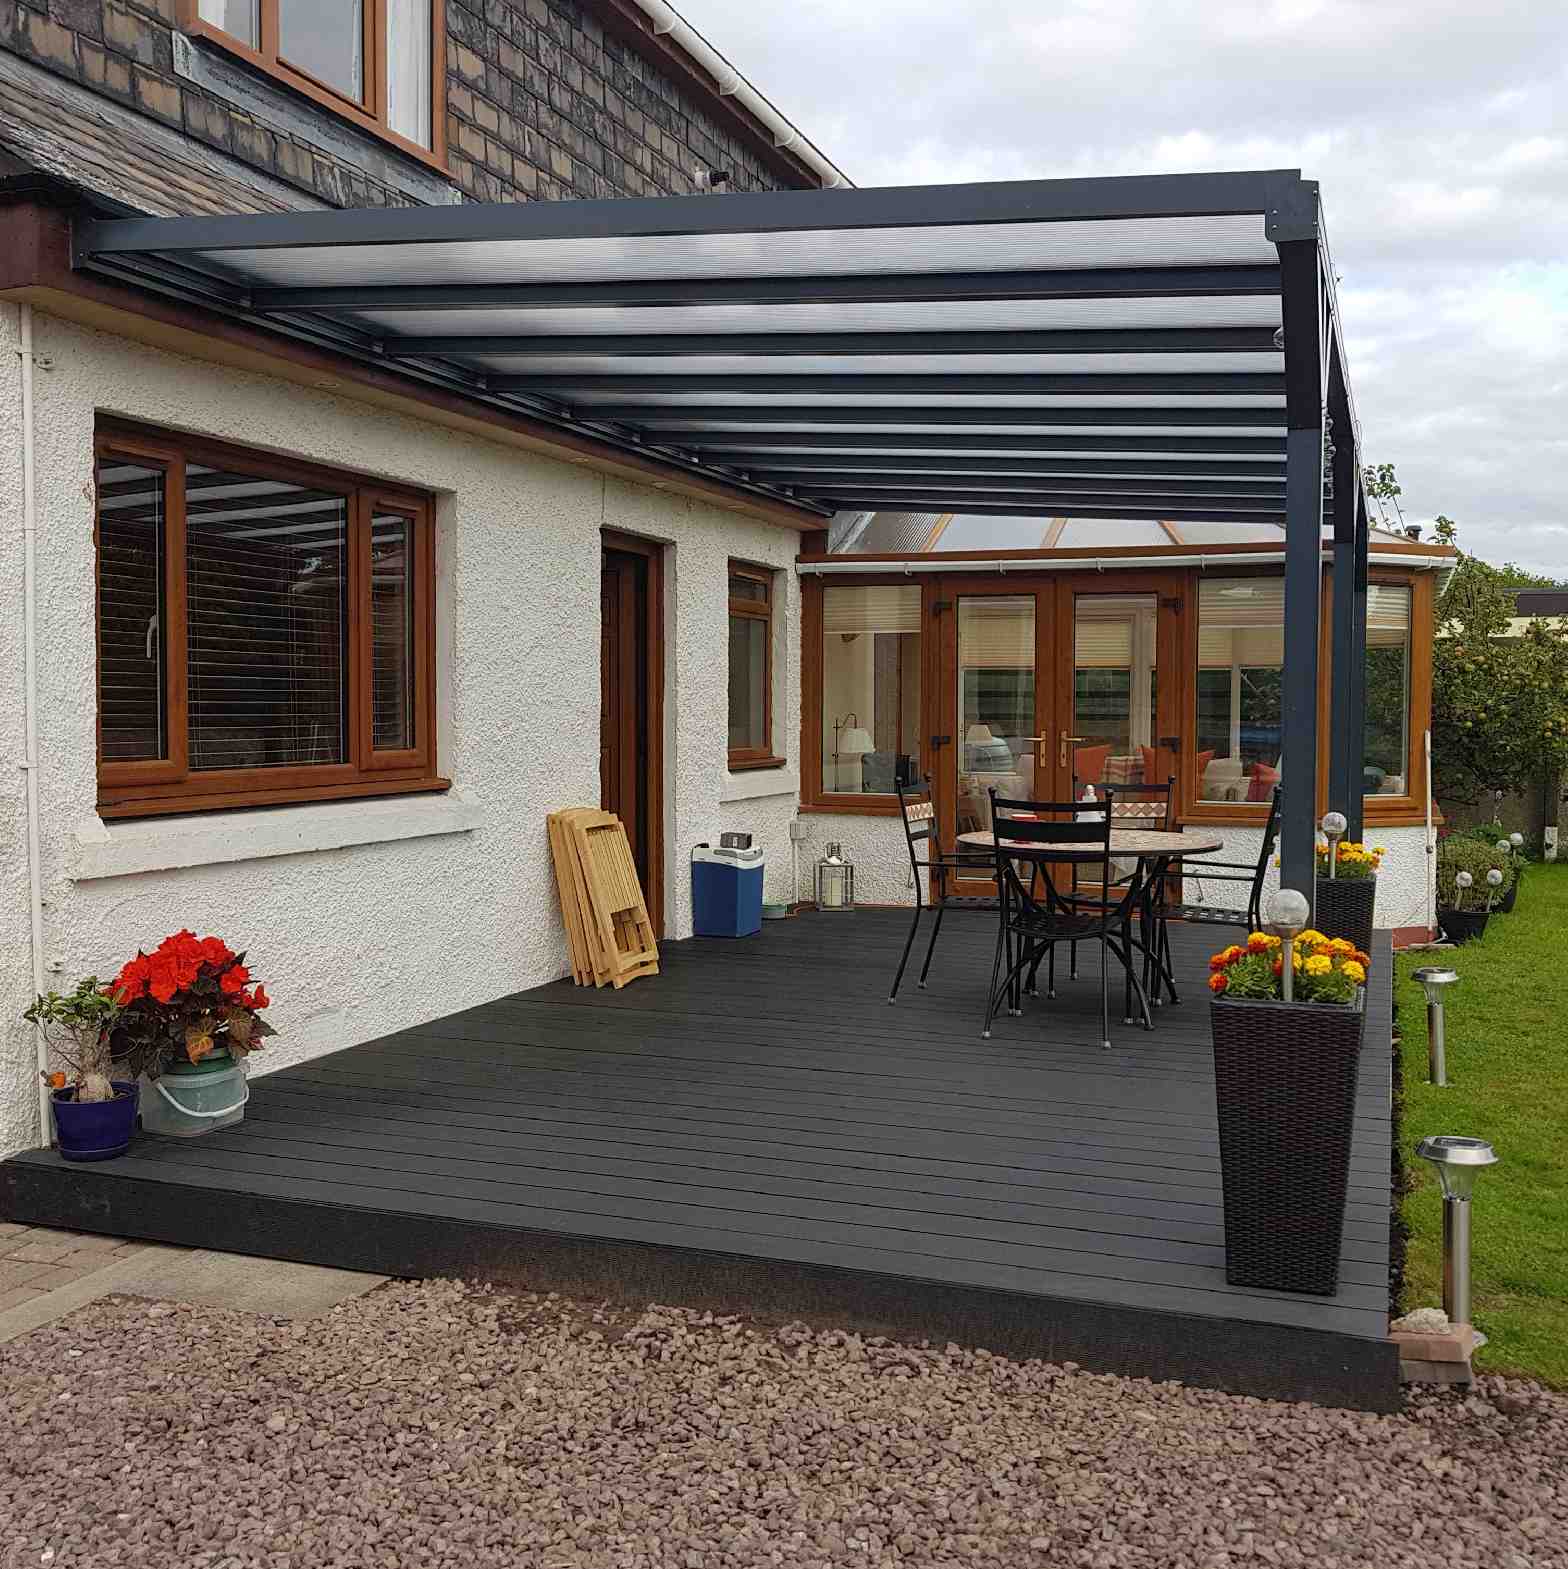 Buy Omega Verandah, Anthracite Grey, 16mm Polycarbonate Glazing - 11.6m (W) x 1.5m (P), (5) Supporting Posts online today